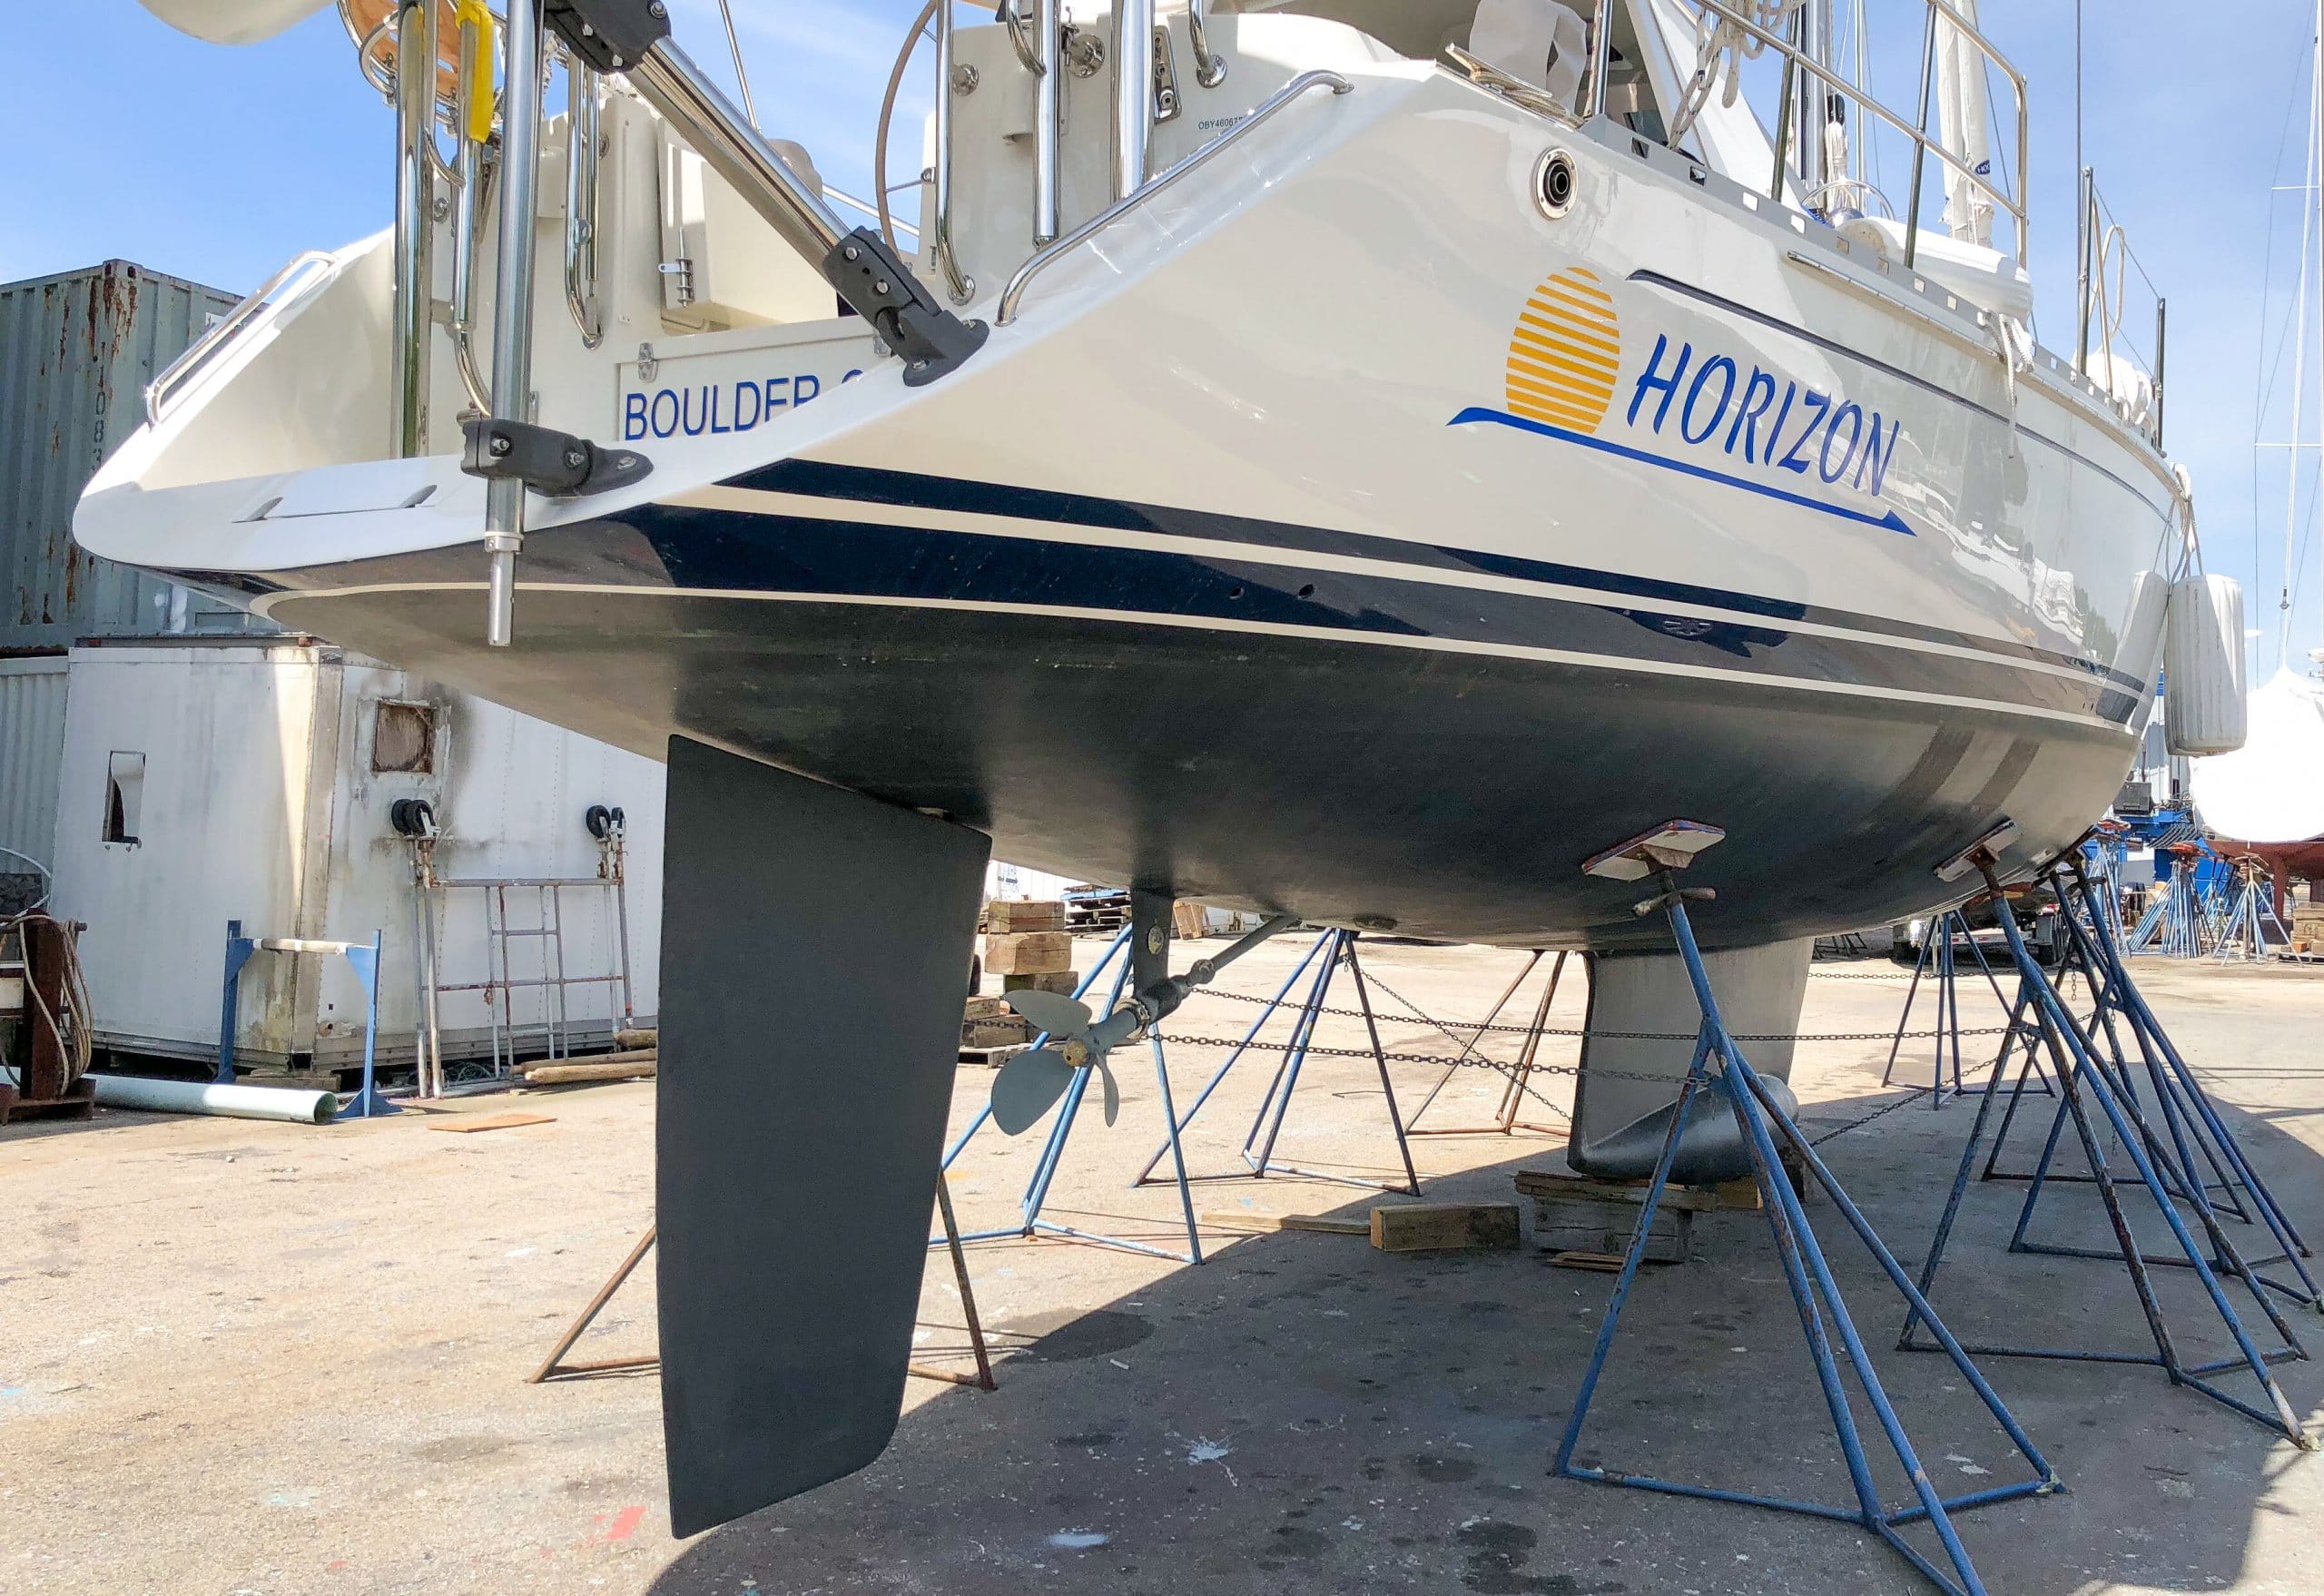 Outbound 46 Review—Part 2, Keel, Rudder, Bow Thruster, and Construction